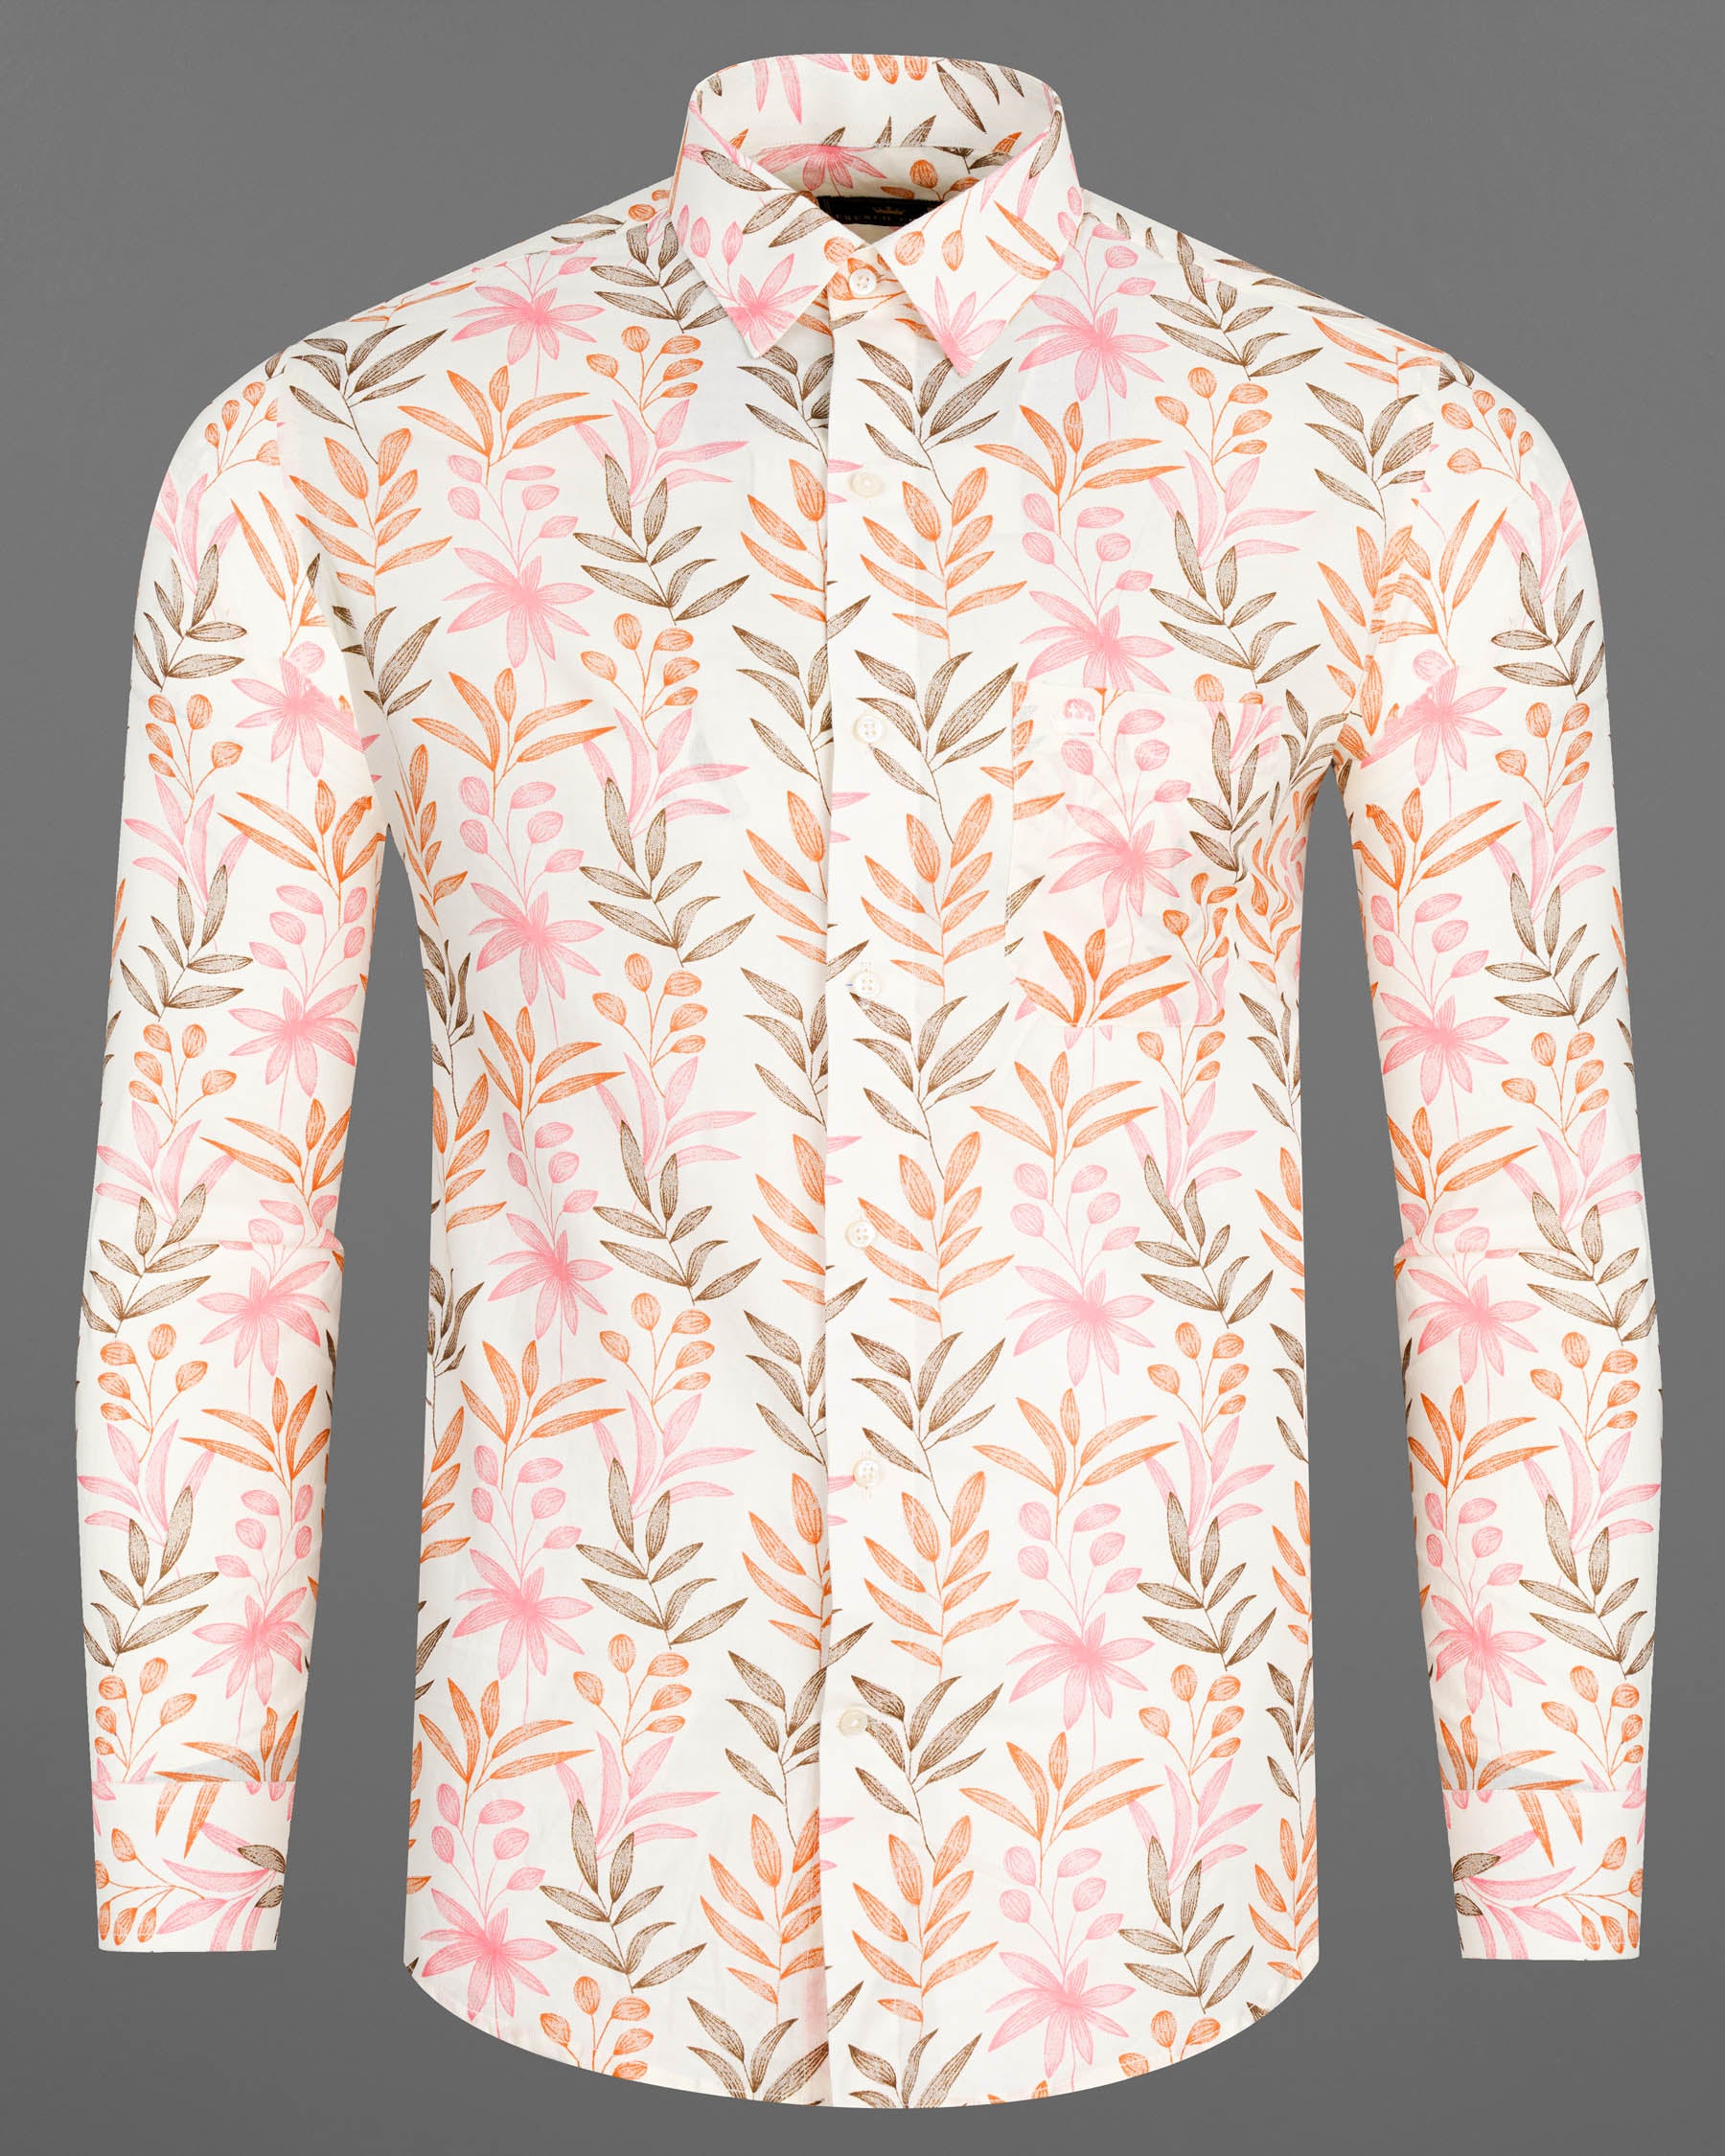 Bright White With Multi Coloured Leaves Printed Premium Cotton Shirt 7729-38,7729-38,7729-39,7729-39,7729-40,7729-40,7729-42,7729-42,7729-44,7729-44,7729-46,7729-46,7729-48,7729-48,7729-50,7729-50,7729-52,7729-52